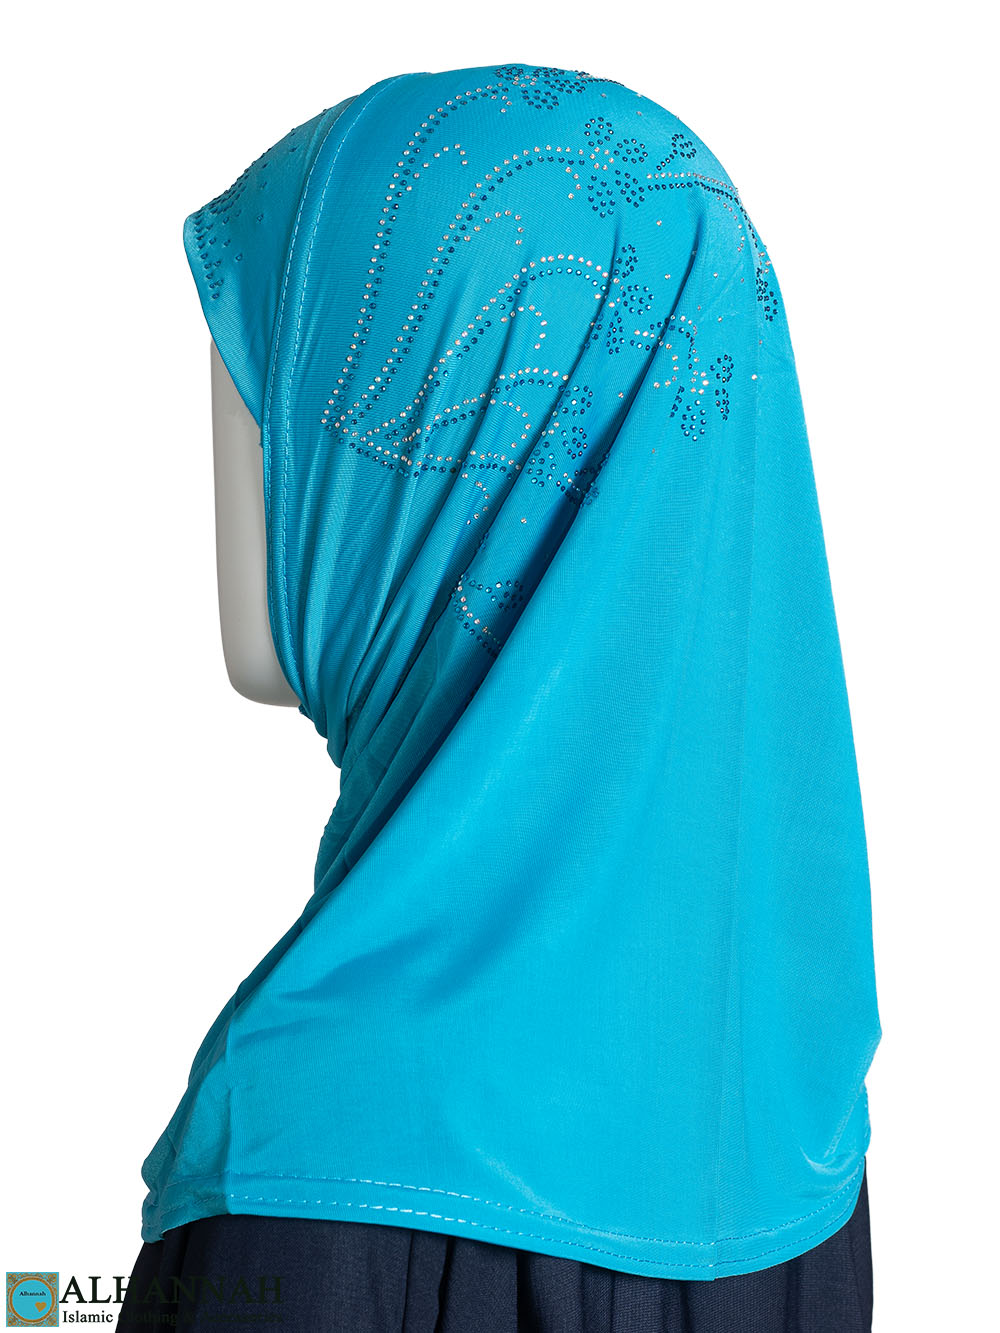 Girls Beaded Bouquet Amira Hijab - Turquoise ch572